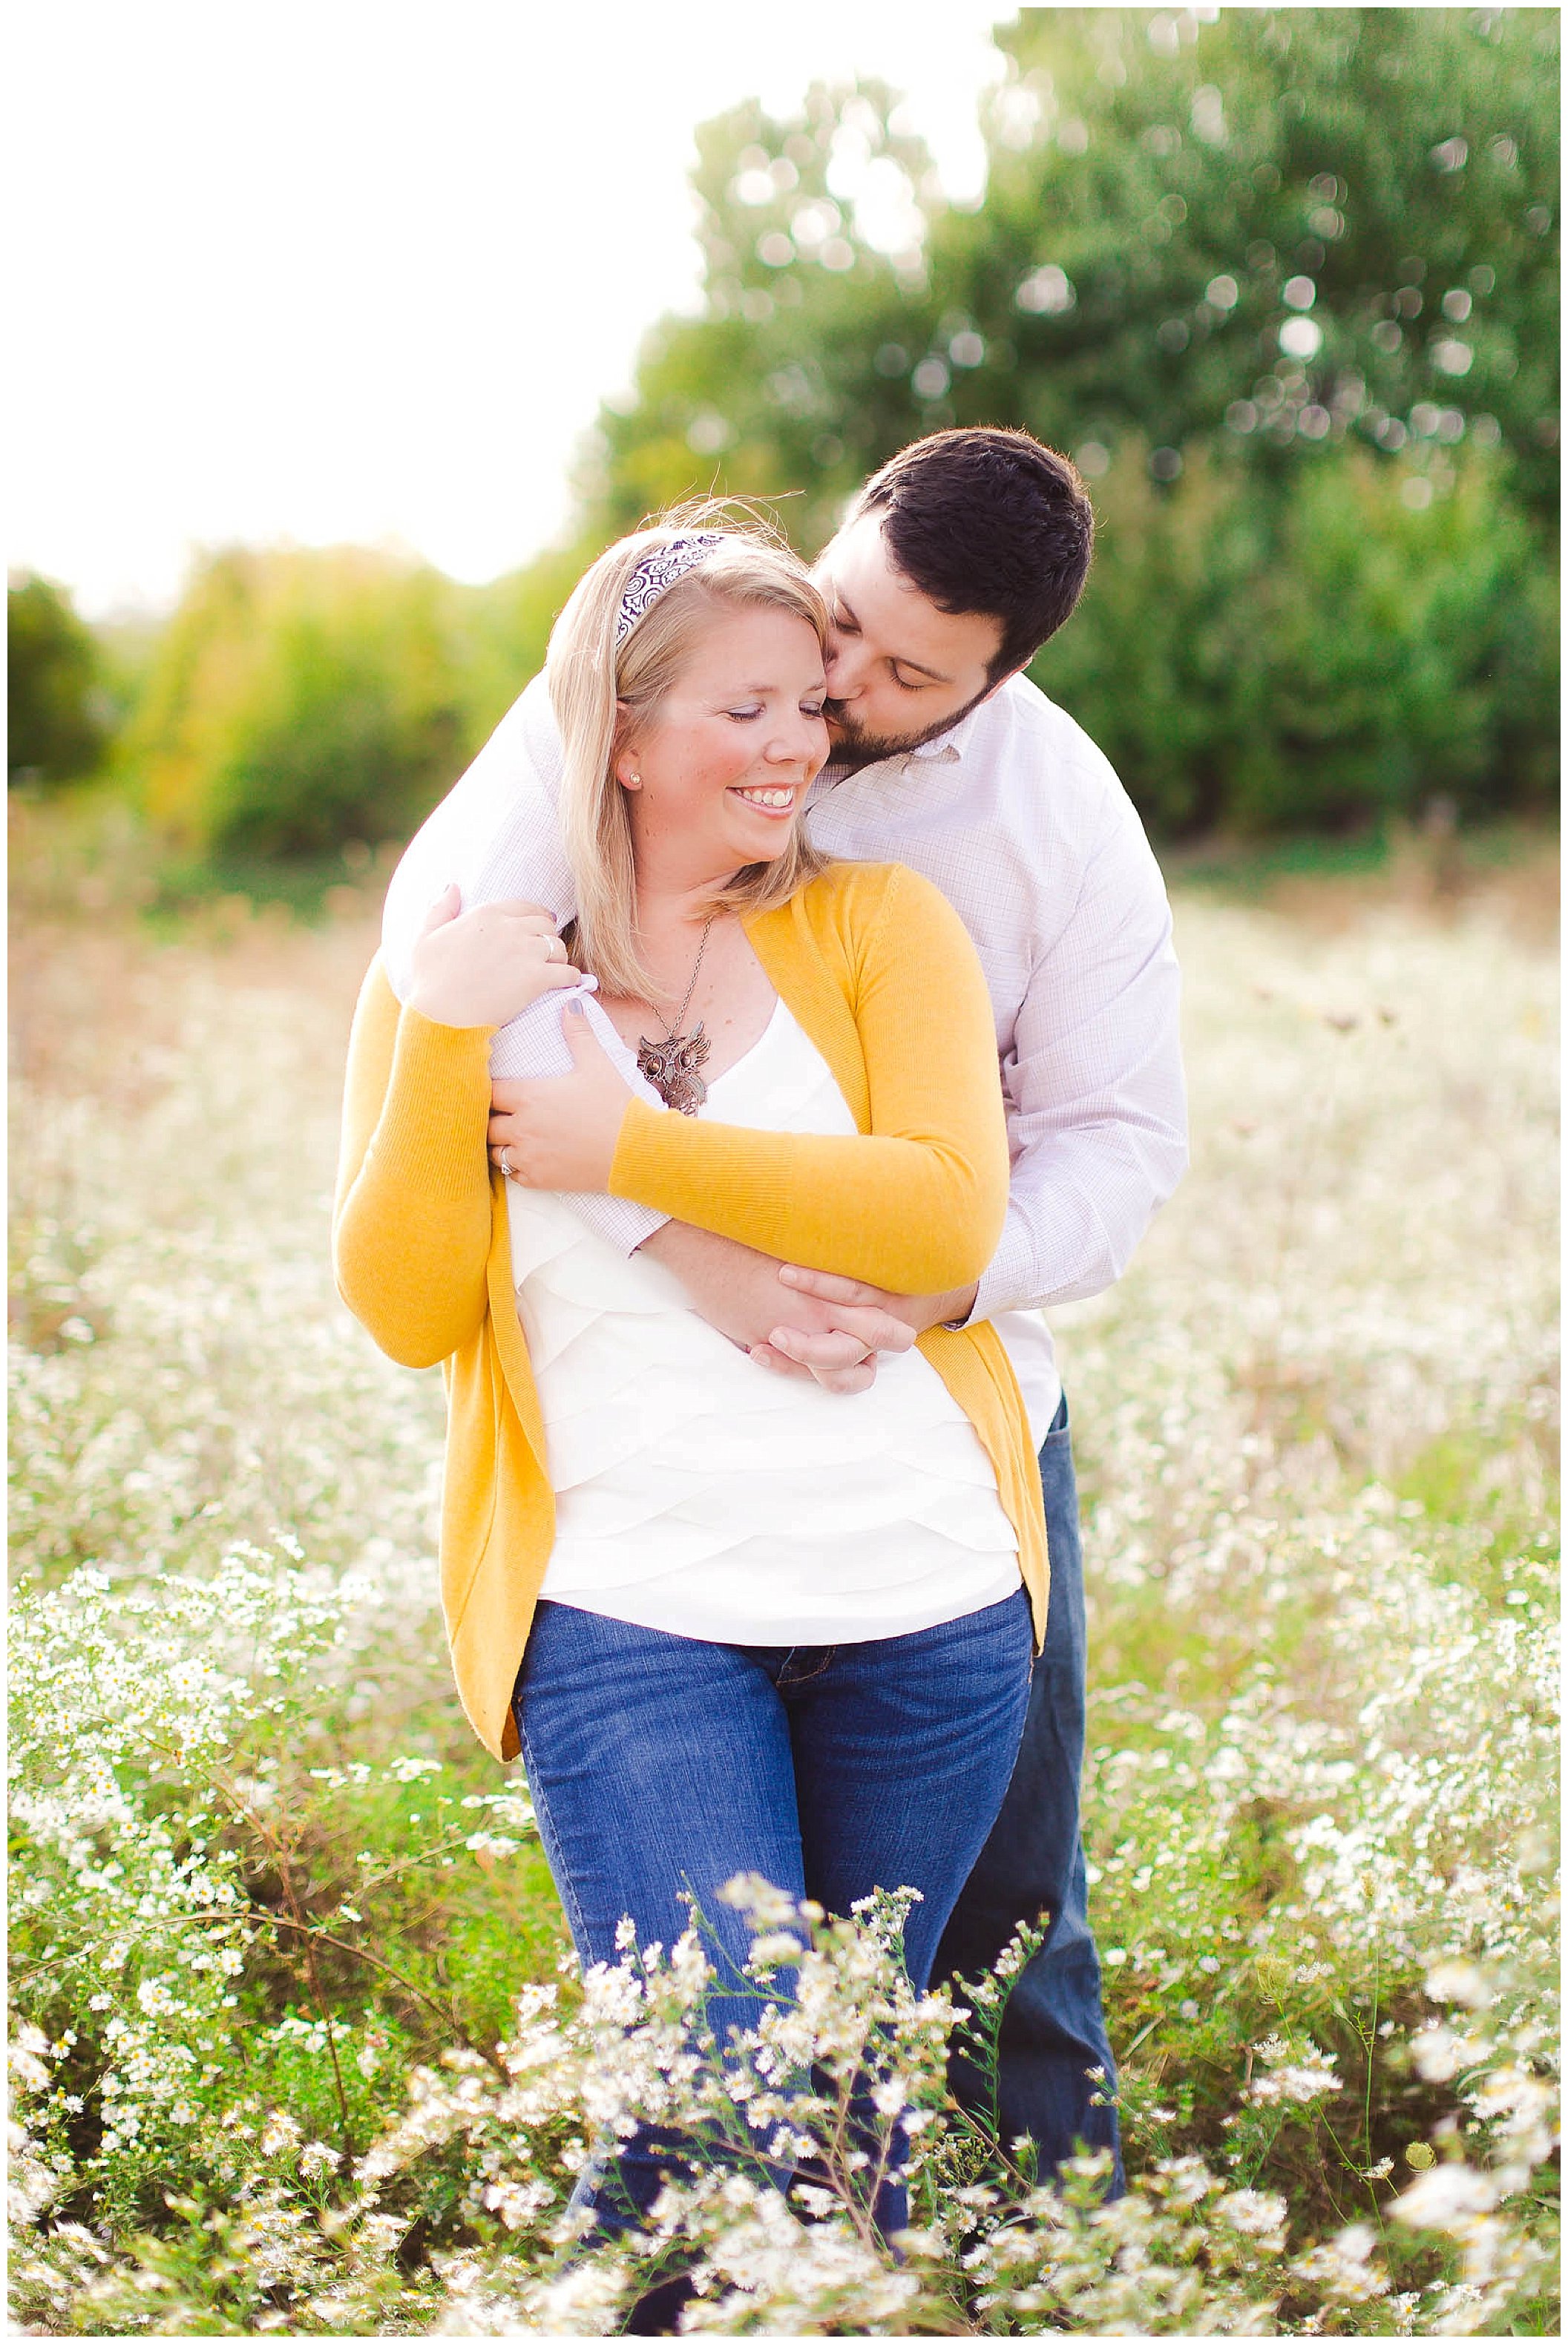 Sunshine filled engagement session in a field of wildflowers, Fort Wayne Indiana Wedding Photographer_0013.jpg